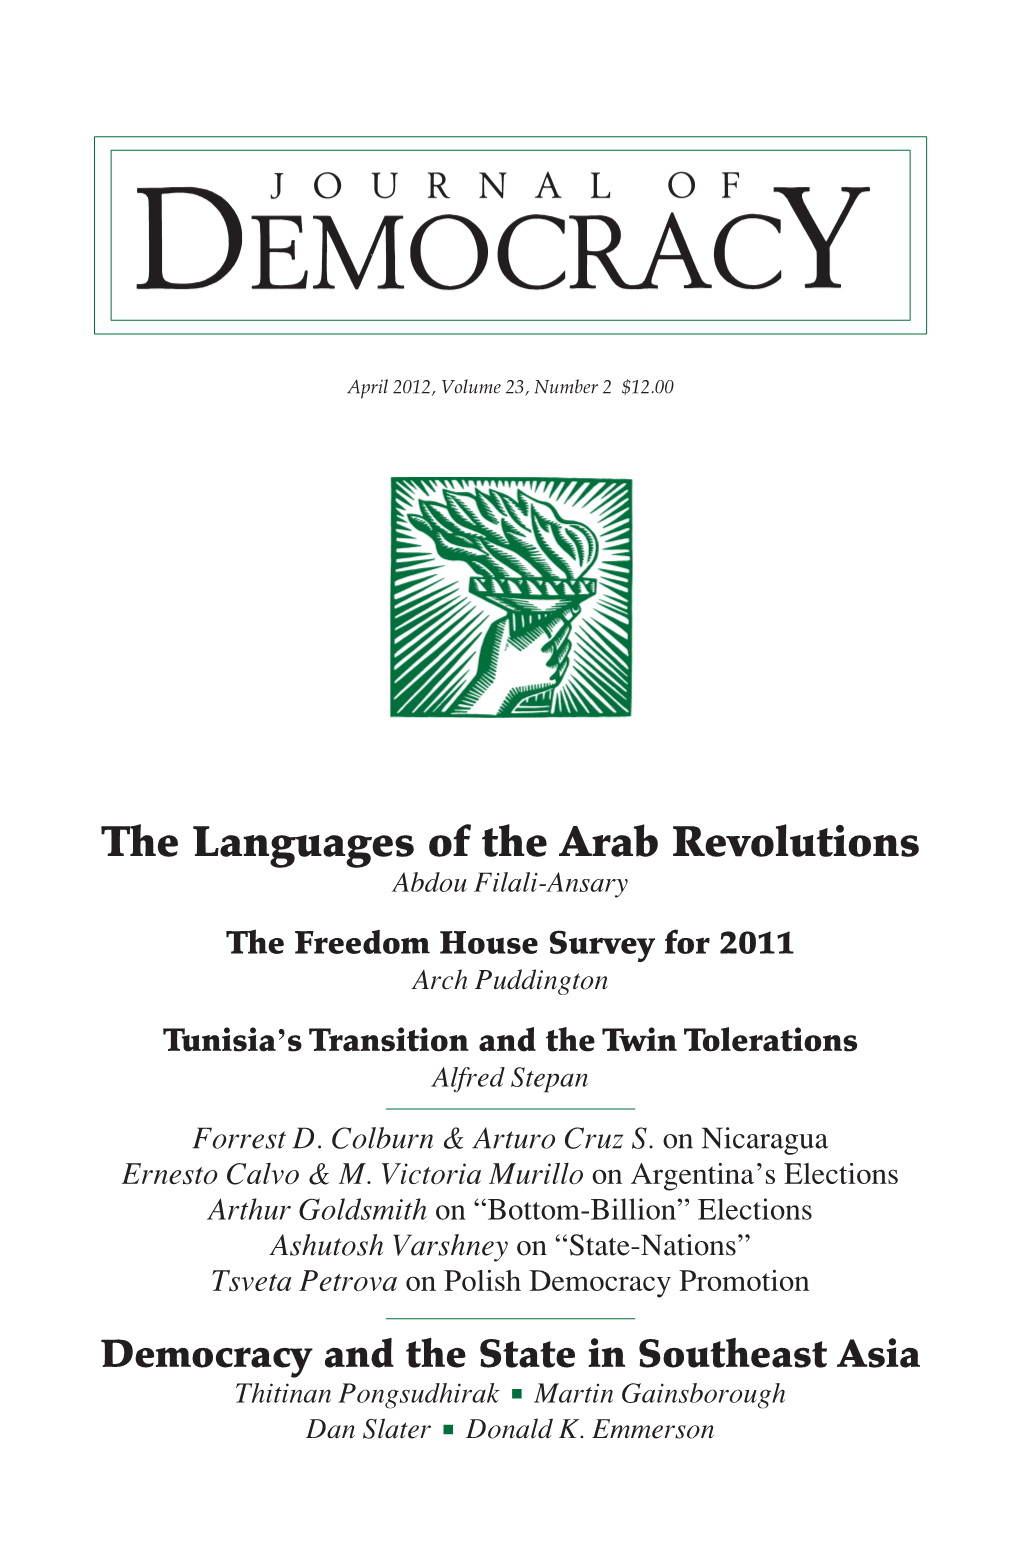 The Languages of the Arab Revolutions Abdou Filali-Ansary the Freedom House Survey for 2011 Arch Puddington